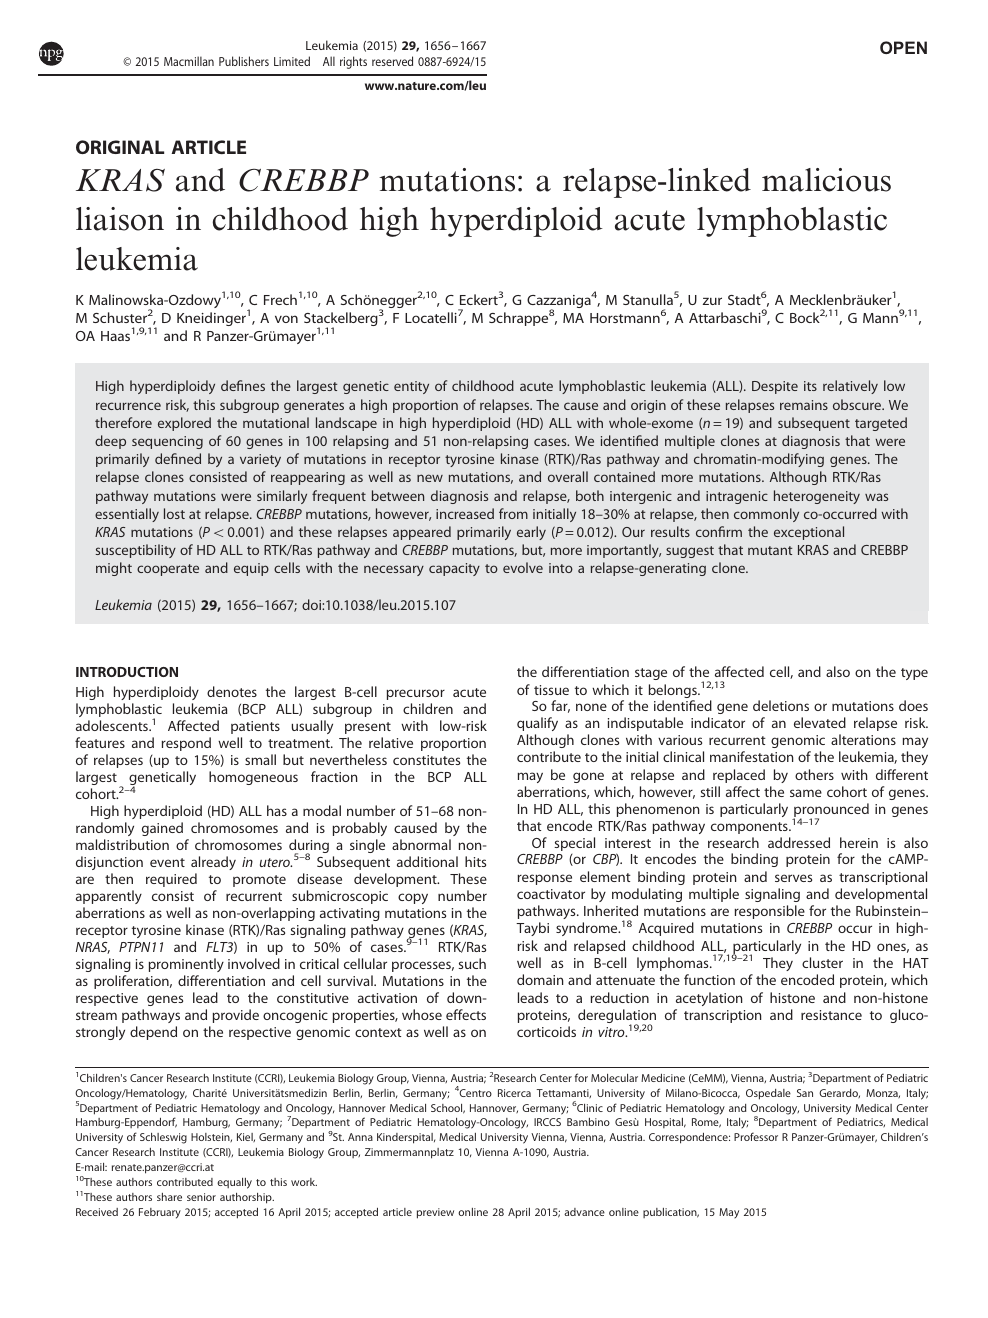 Kras And Crebbp Mutations A Relapse Linked Malicious Liaison In Childhood High Hyperdiploid Acute Lymphoblastic Leukemia Topic Of Research Paper In Biological Sciences Download Scholarly Article Pdf And Read For Free On